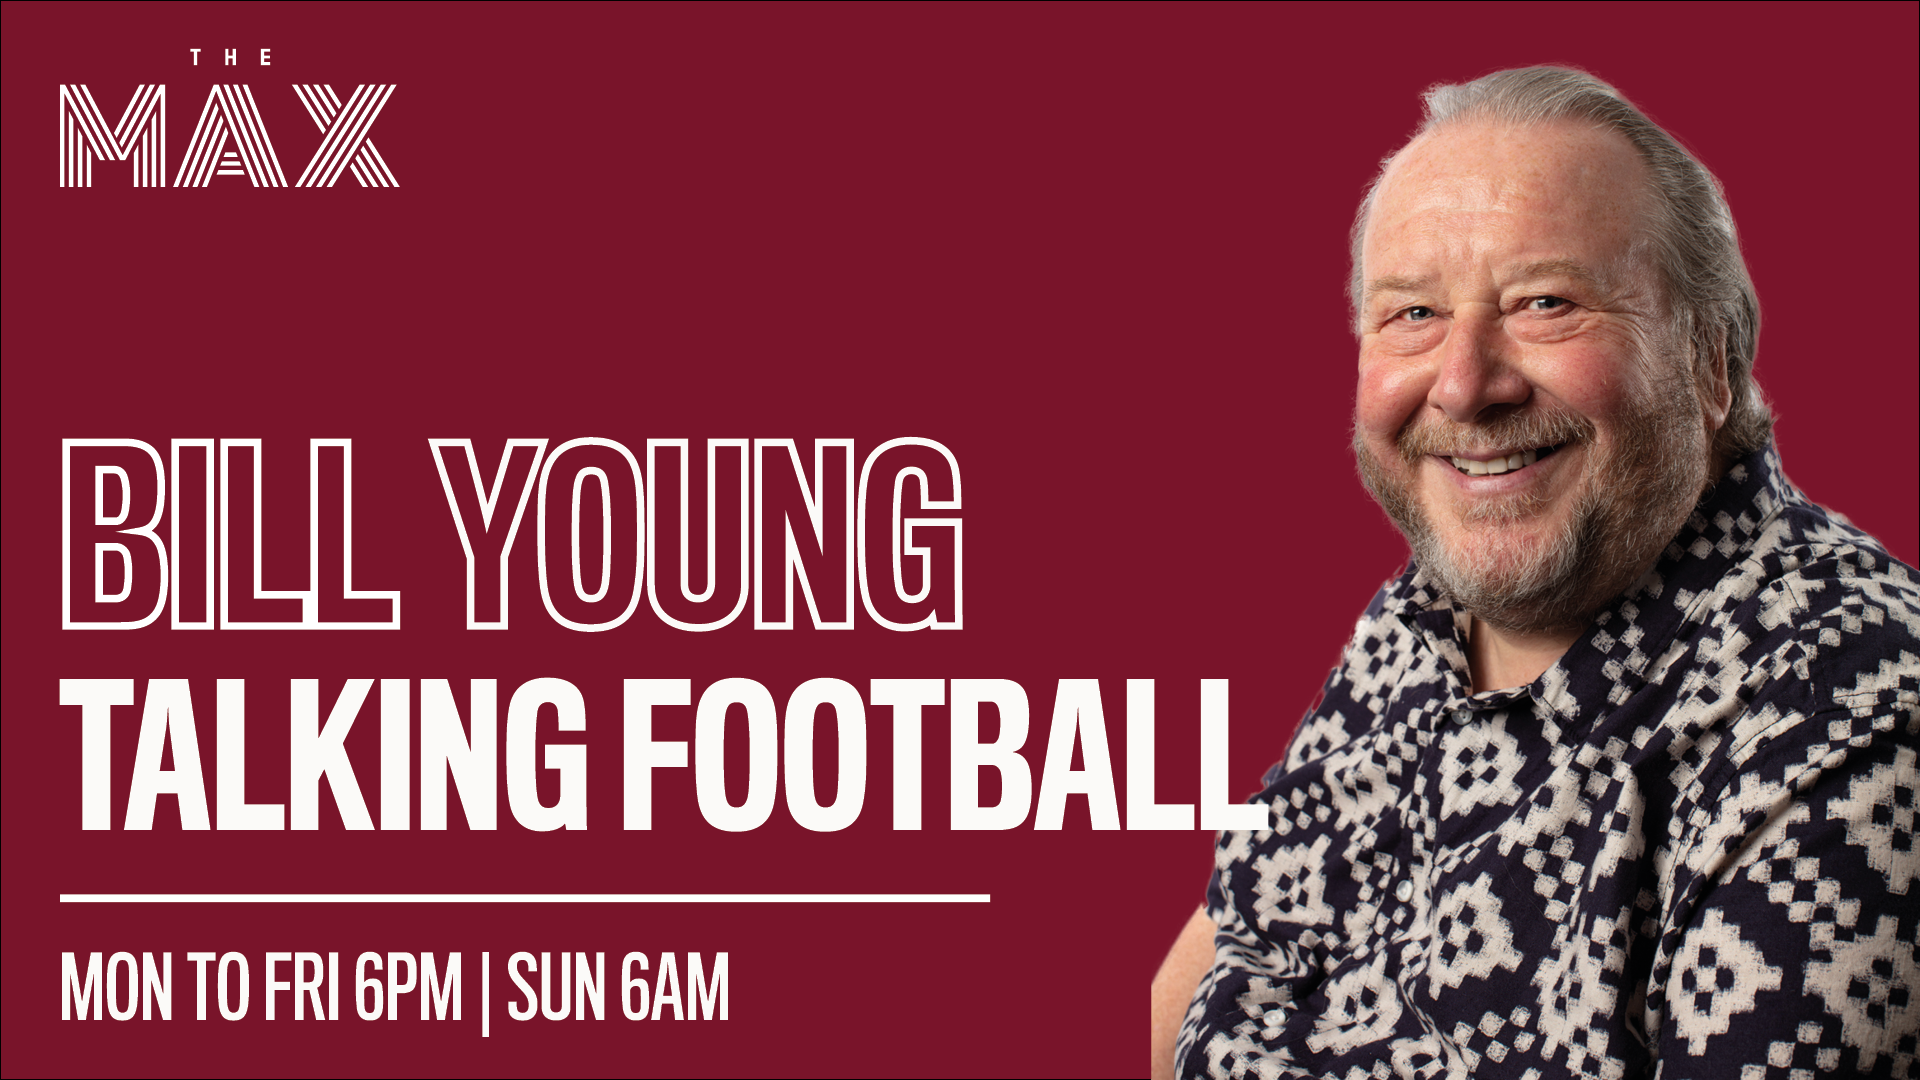 Talking Football with Bill Young - Wednesday 24th March